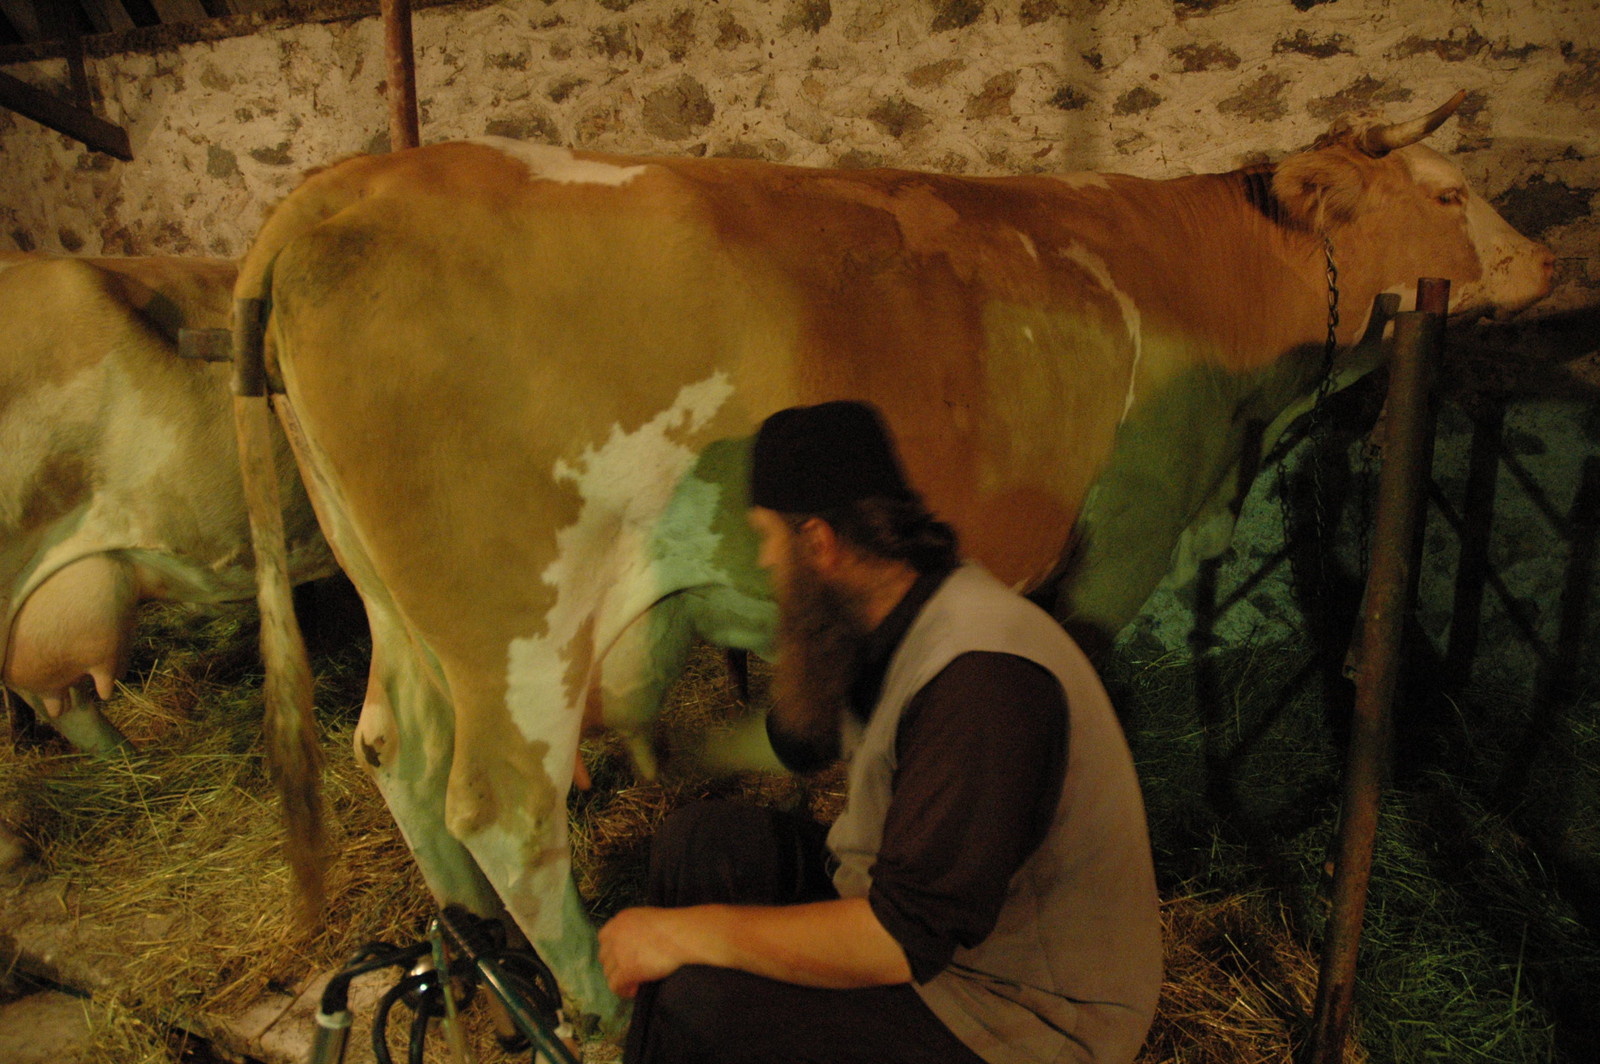 Milking the cows 14